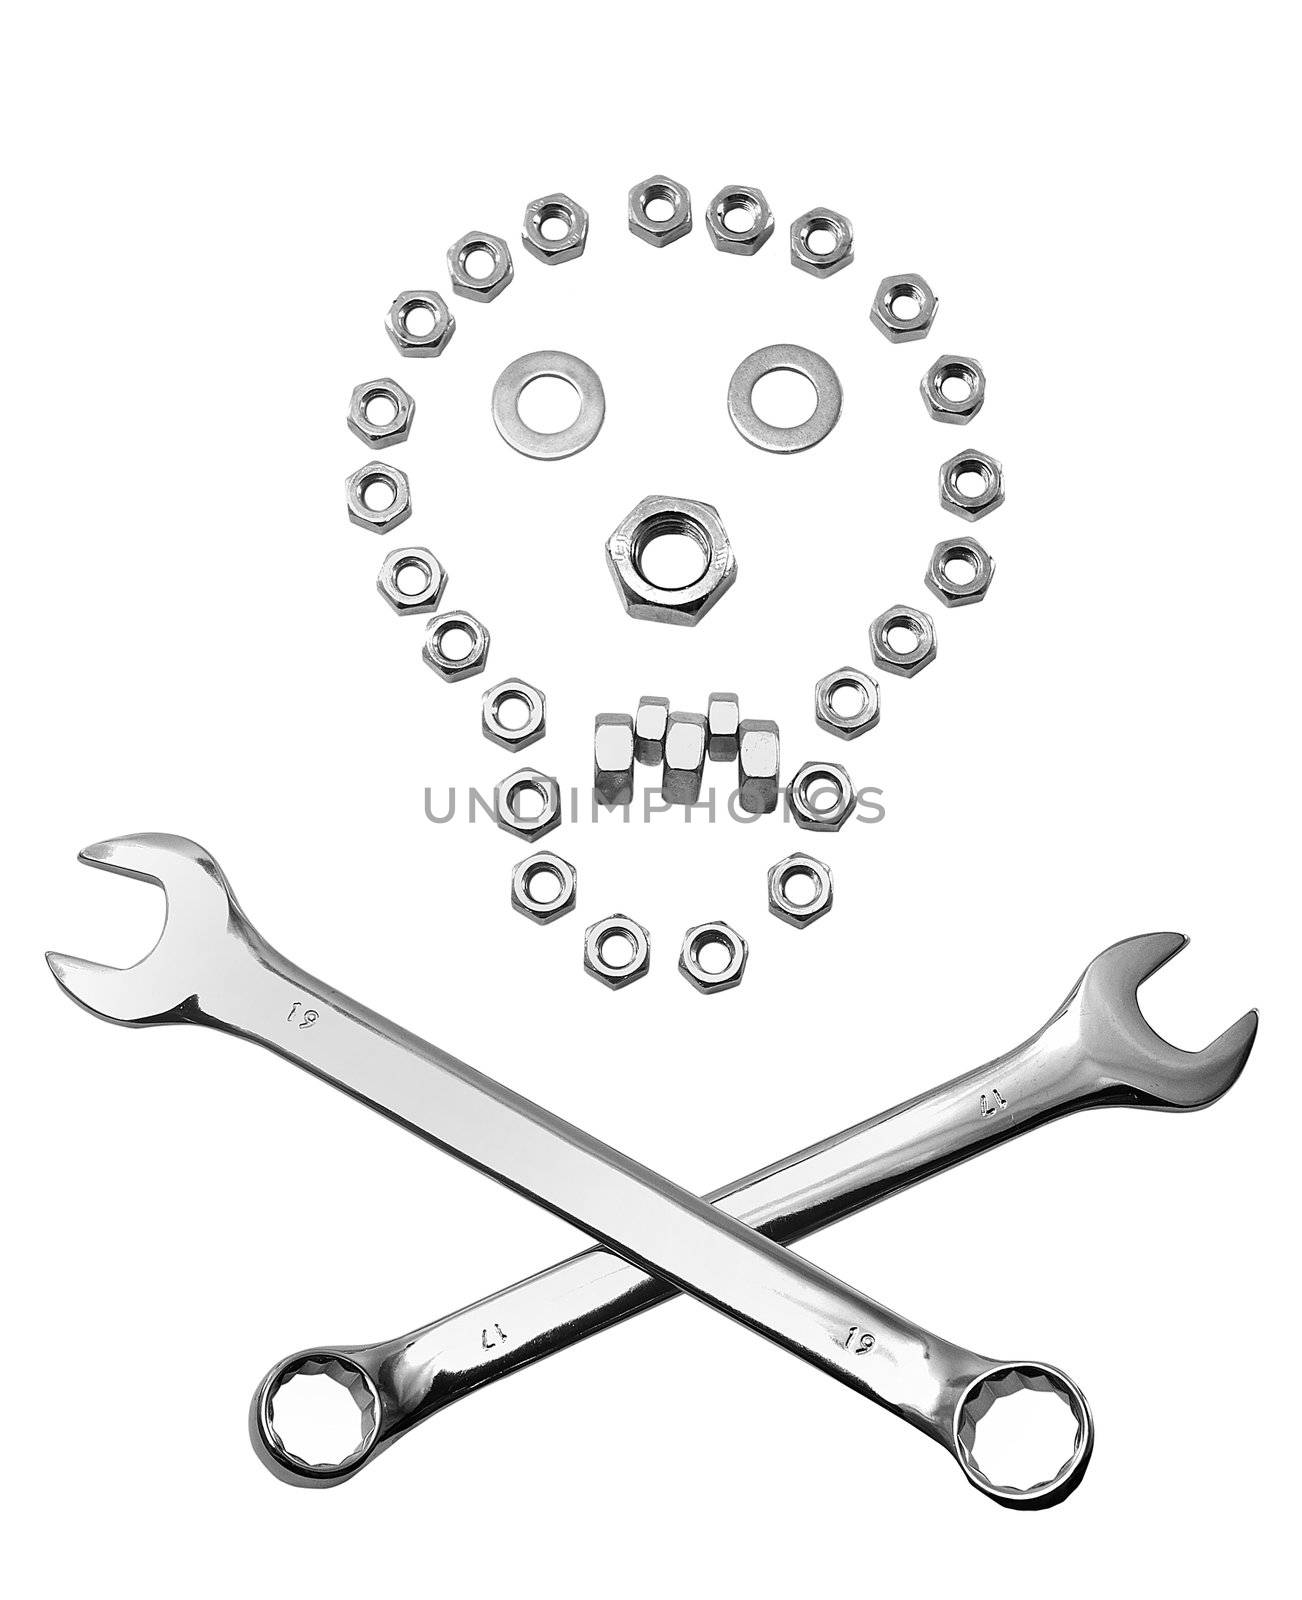 Nuts & bolts danger abstract conposition skull